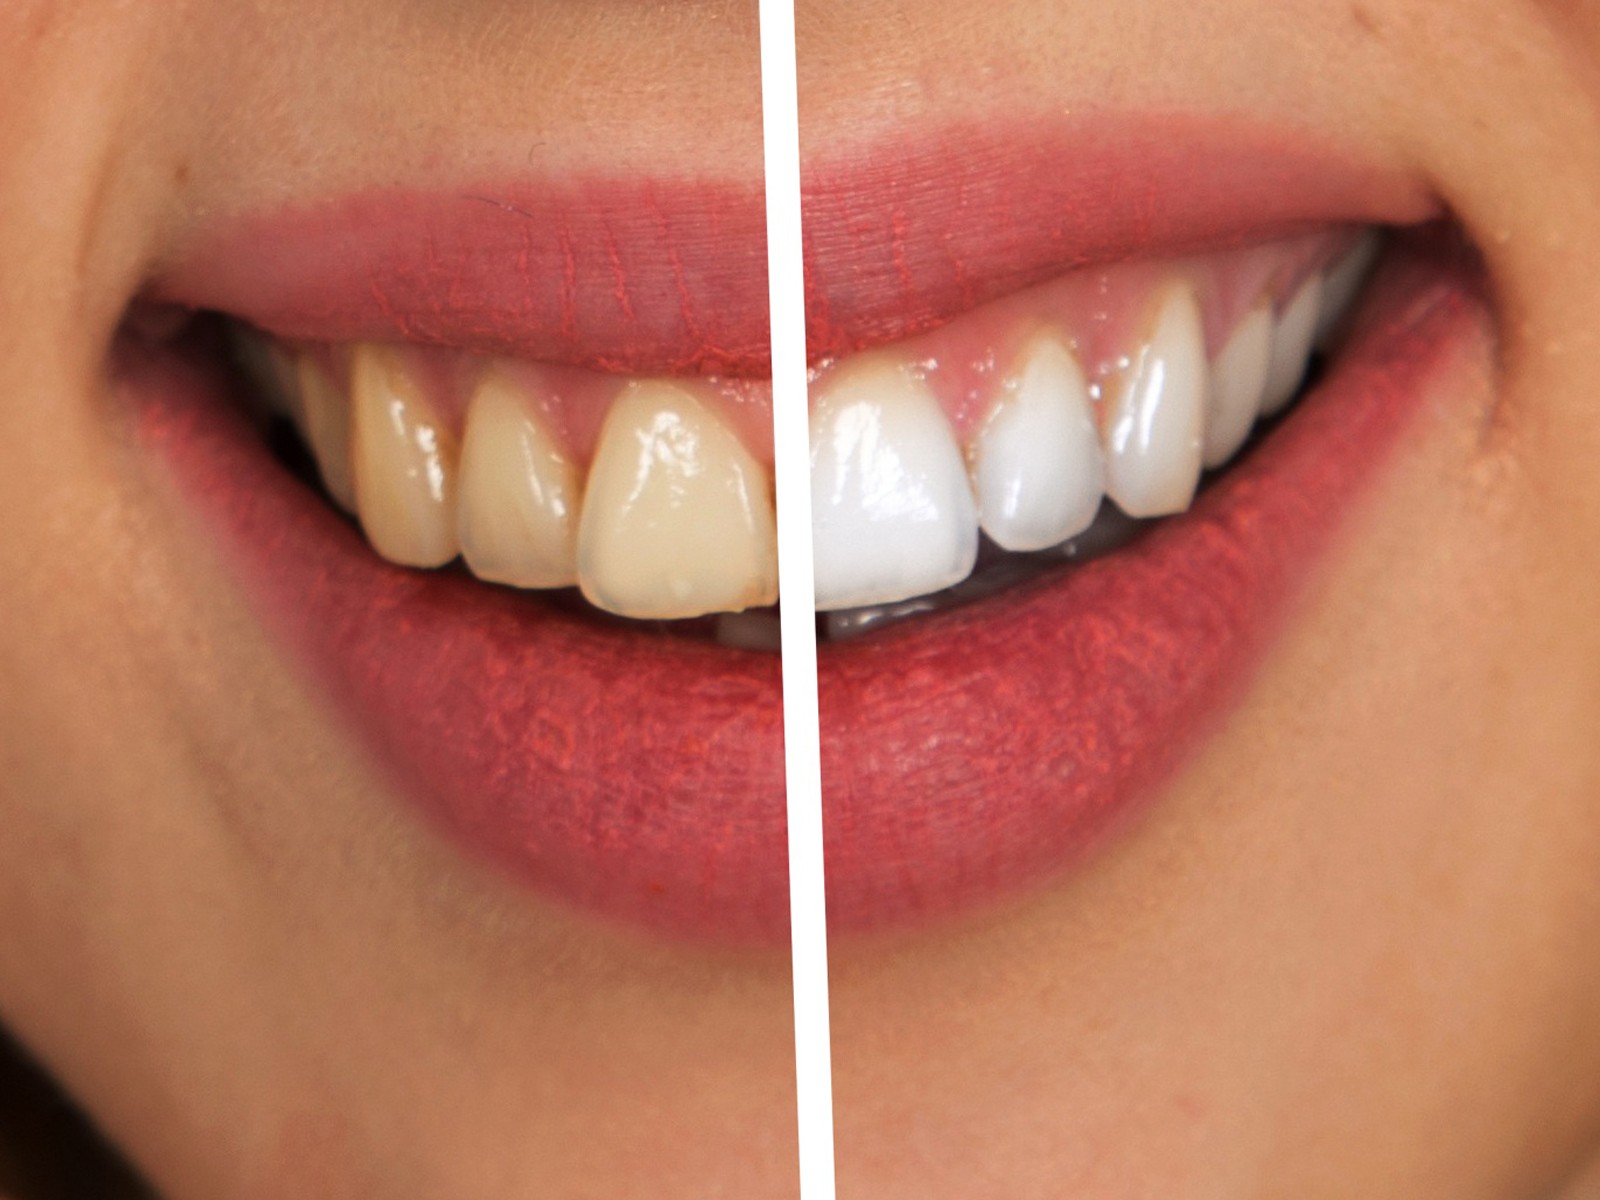 How can I make my yellow teeth whiter naturally?